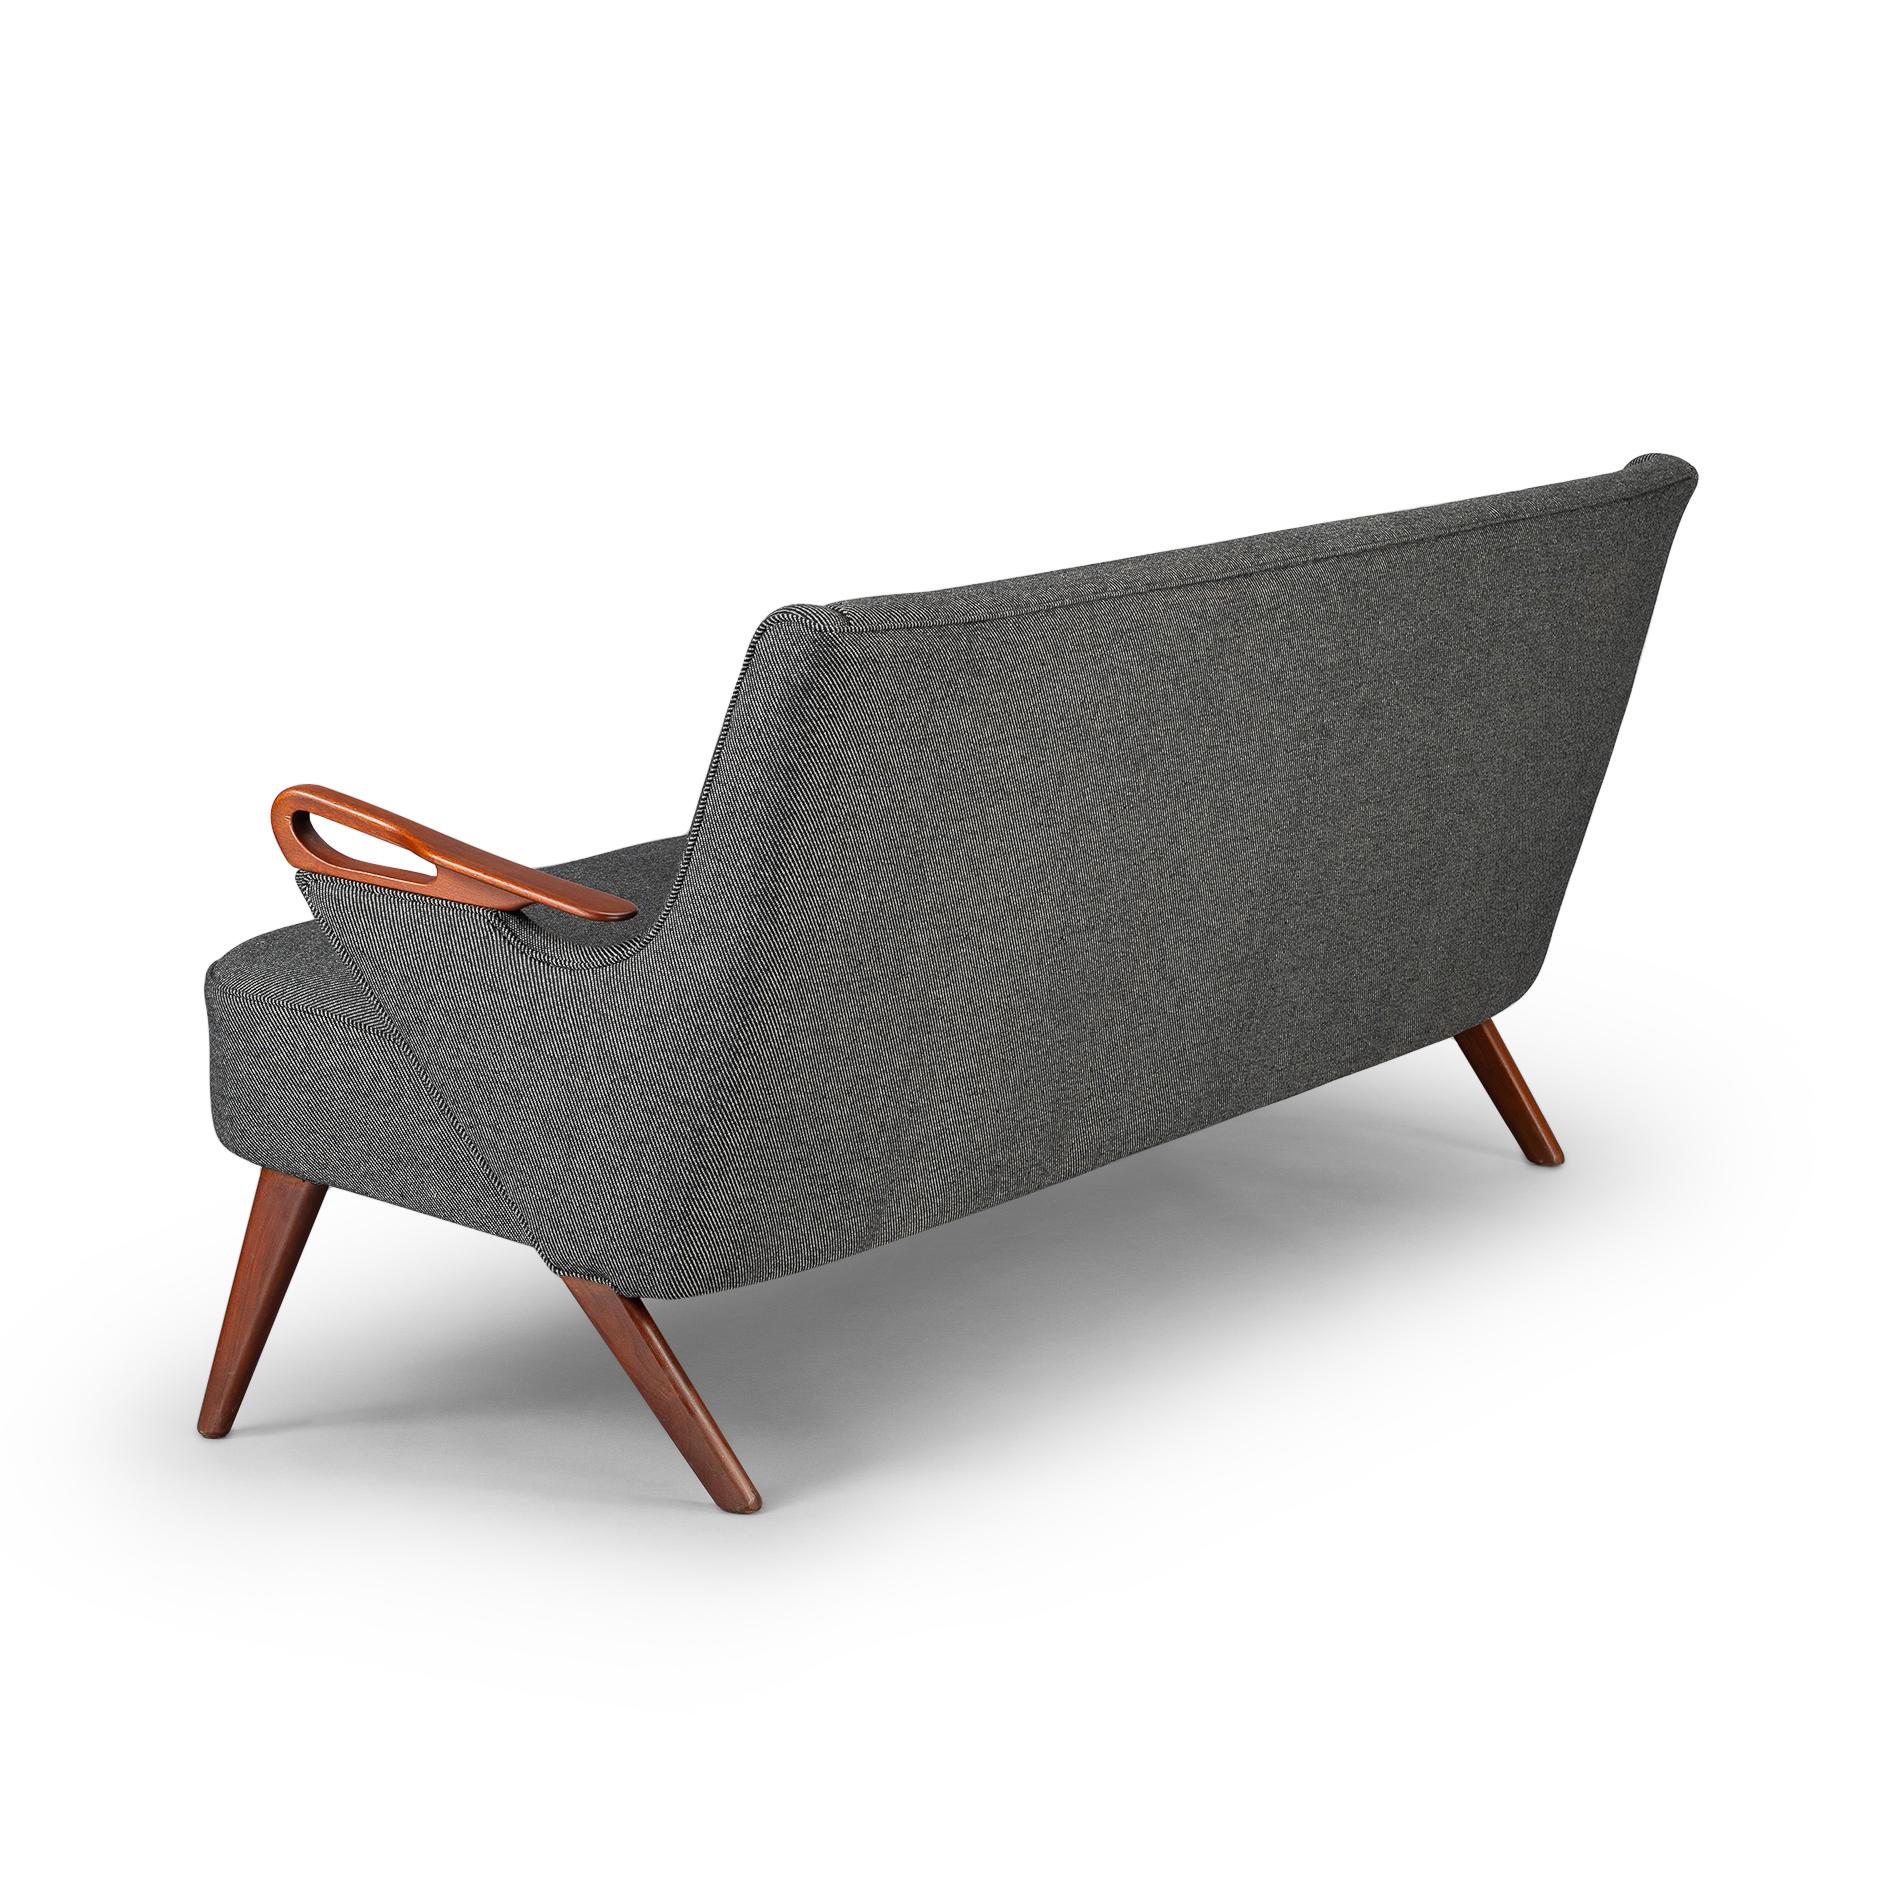 Mid-20th Century Reupholstered Dark Grey 2.5 Seat Sofa No. Cfb52 by C. Findahl Brodersen, 1950s